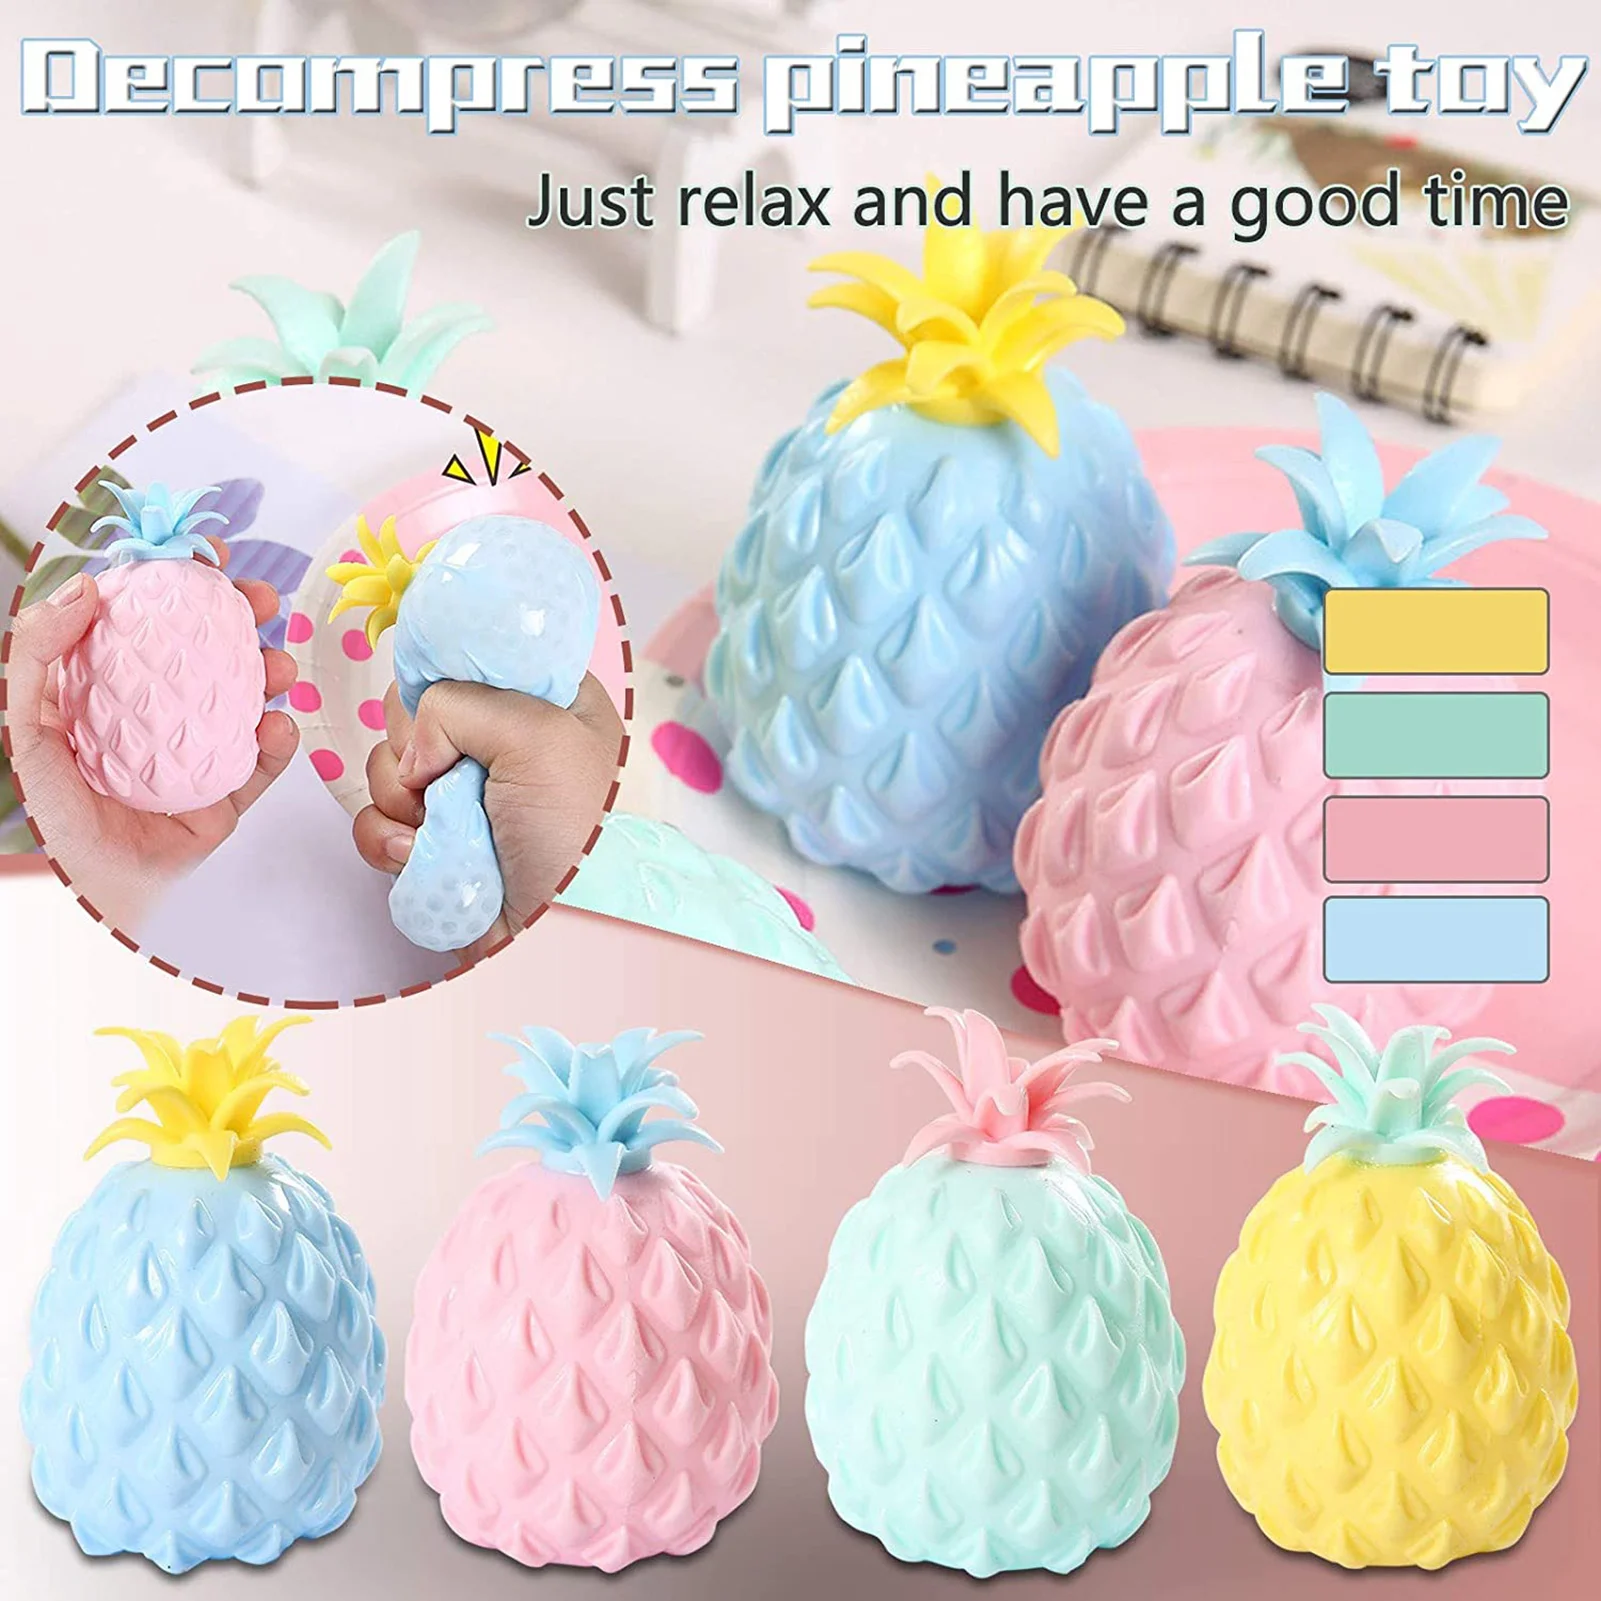 

1pcs Compressive Fun Soft Pineapple Ball Stress Reliever Toy Children Adult Squishy Antistress Creativity Sensory Toy Gift